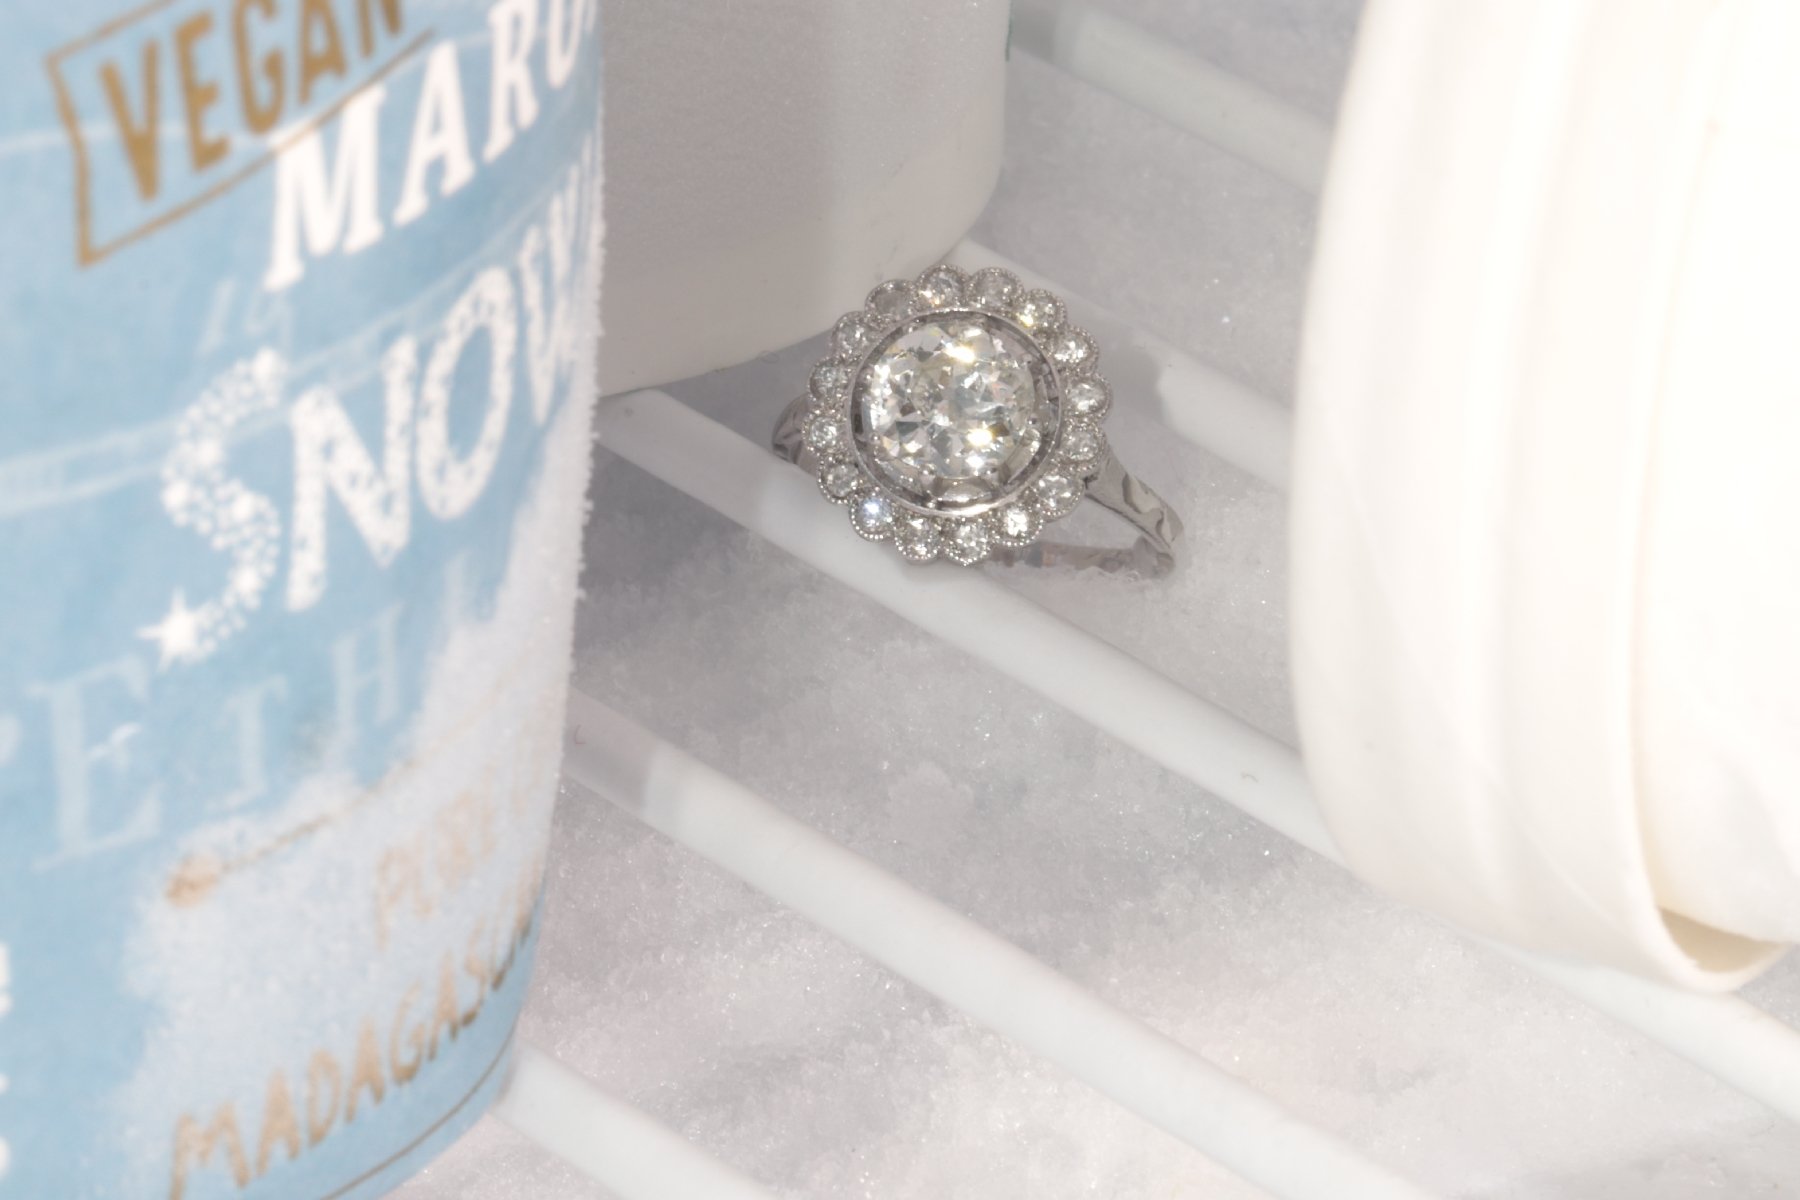 Click the picture to get to see this Platinum Art Deco diamond engagement ring.